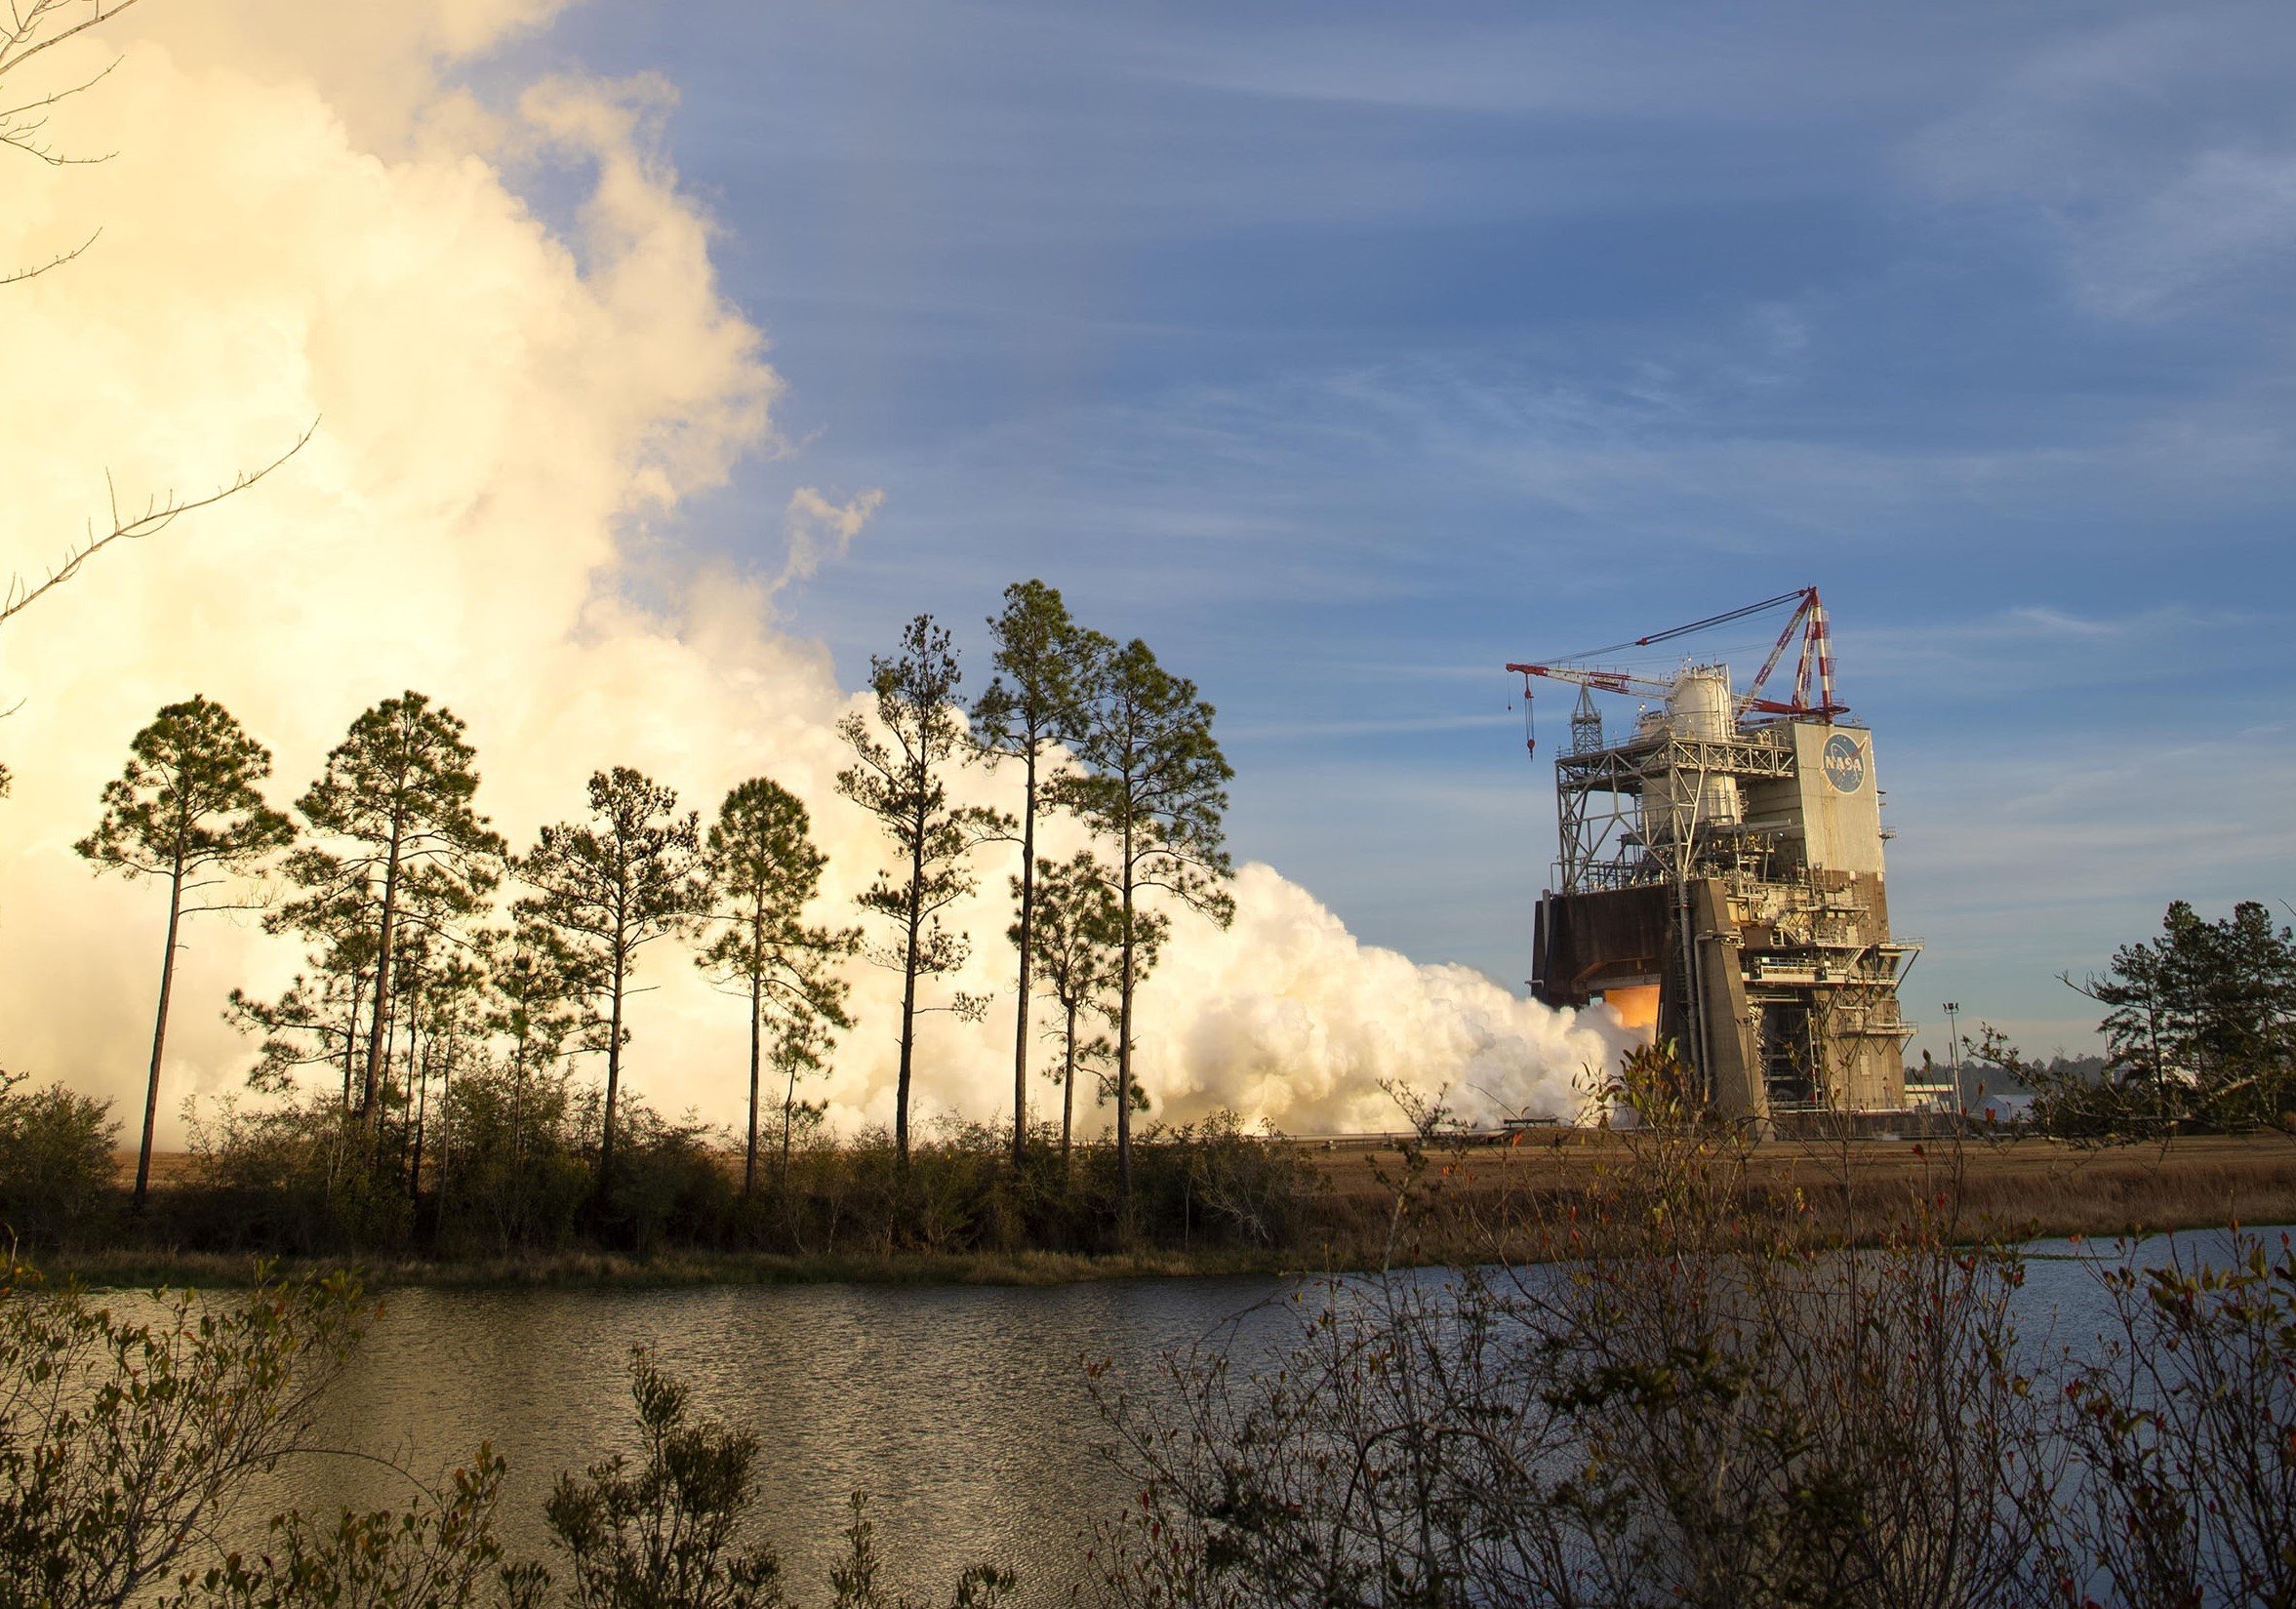 NASA conducts the first hot fire test in a new RS-25 engine test series.